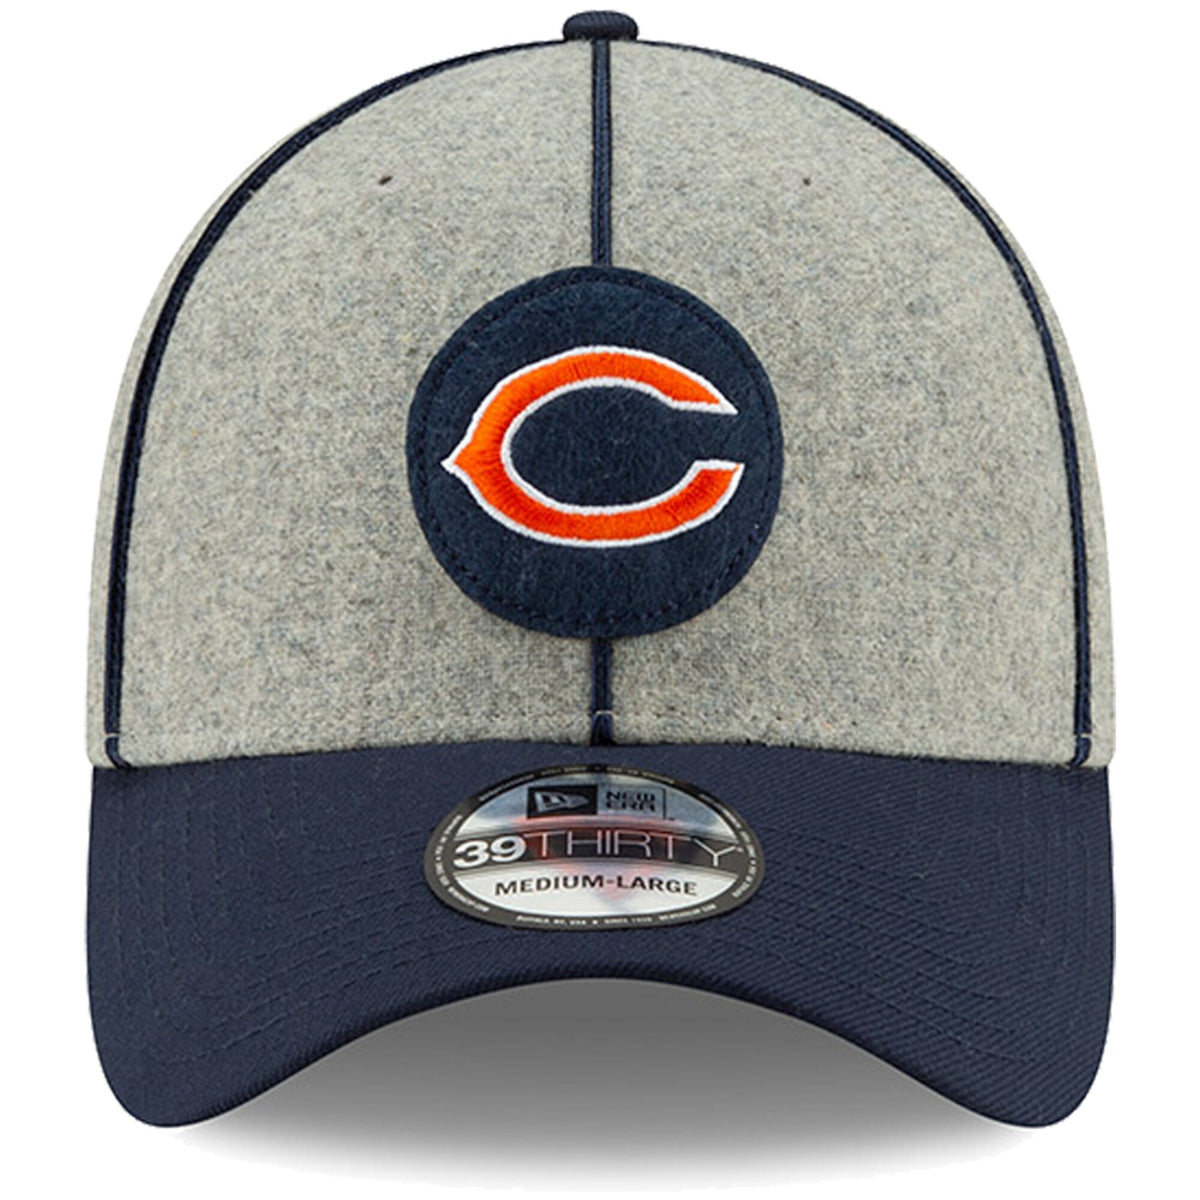 Men's New Era Gray Chicago Bears Color Pack 59FIFTY Fitted Hat